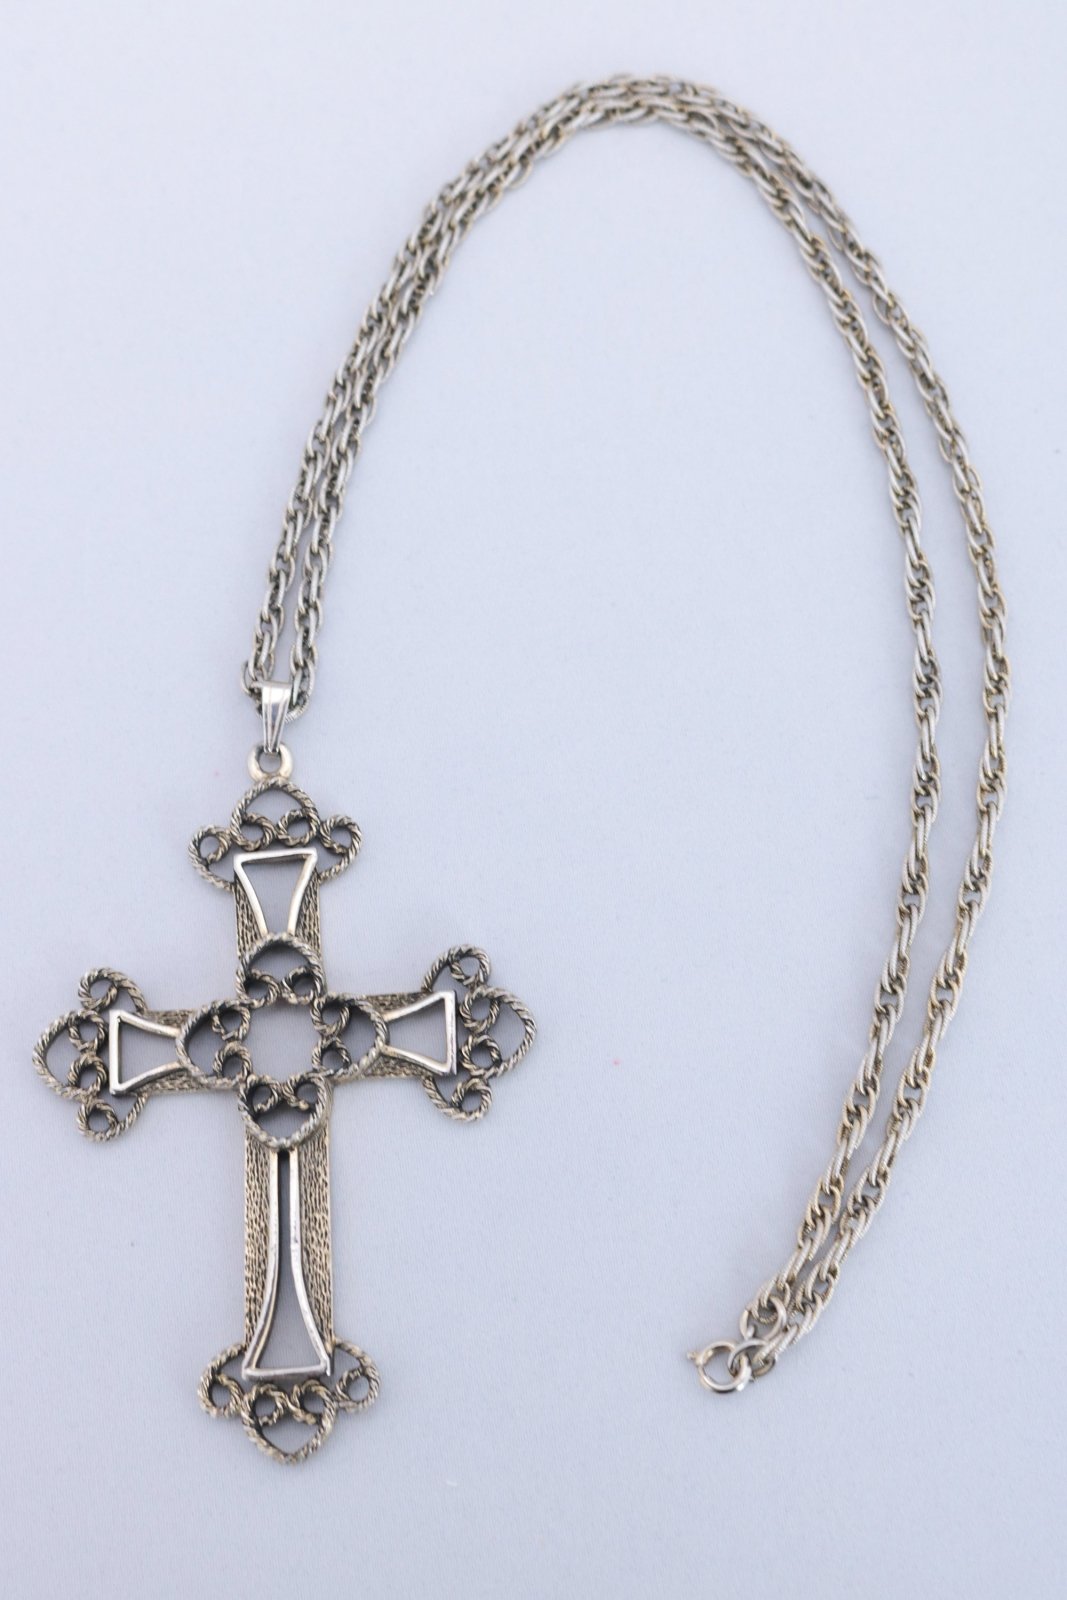 1973 Limited Edition Sarah Coventry Victorian Cross Necklace - Floria Vintage